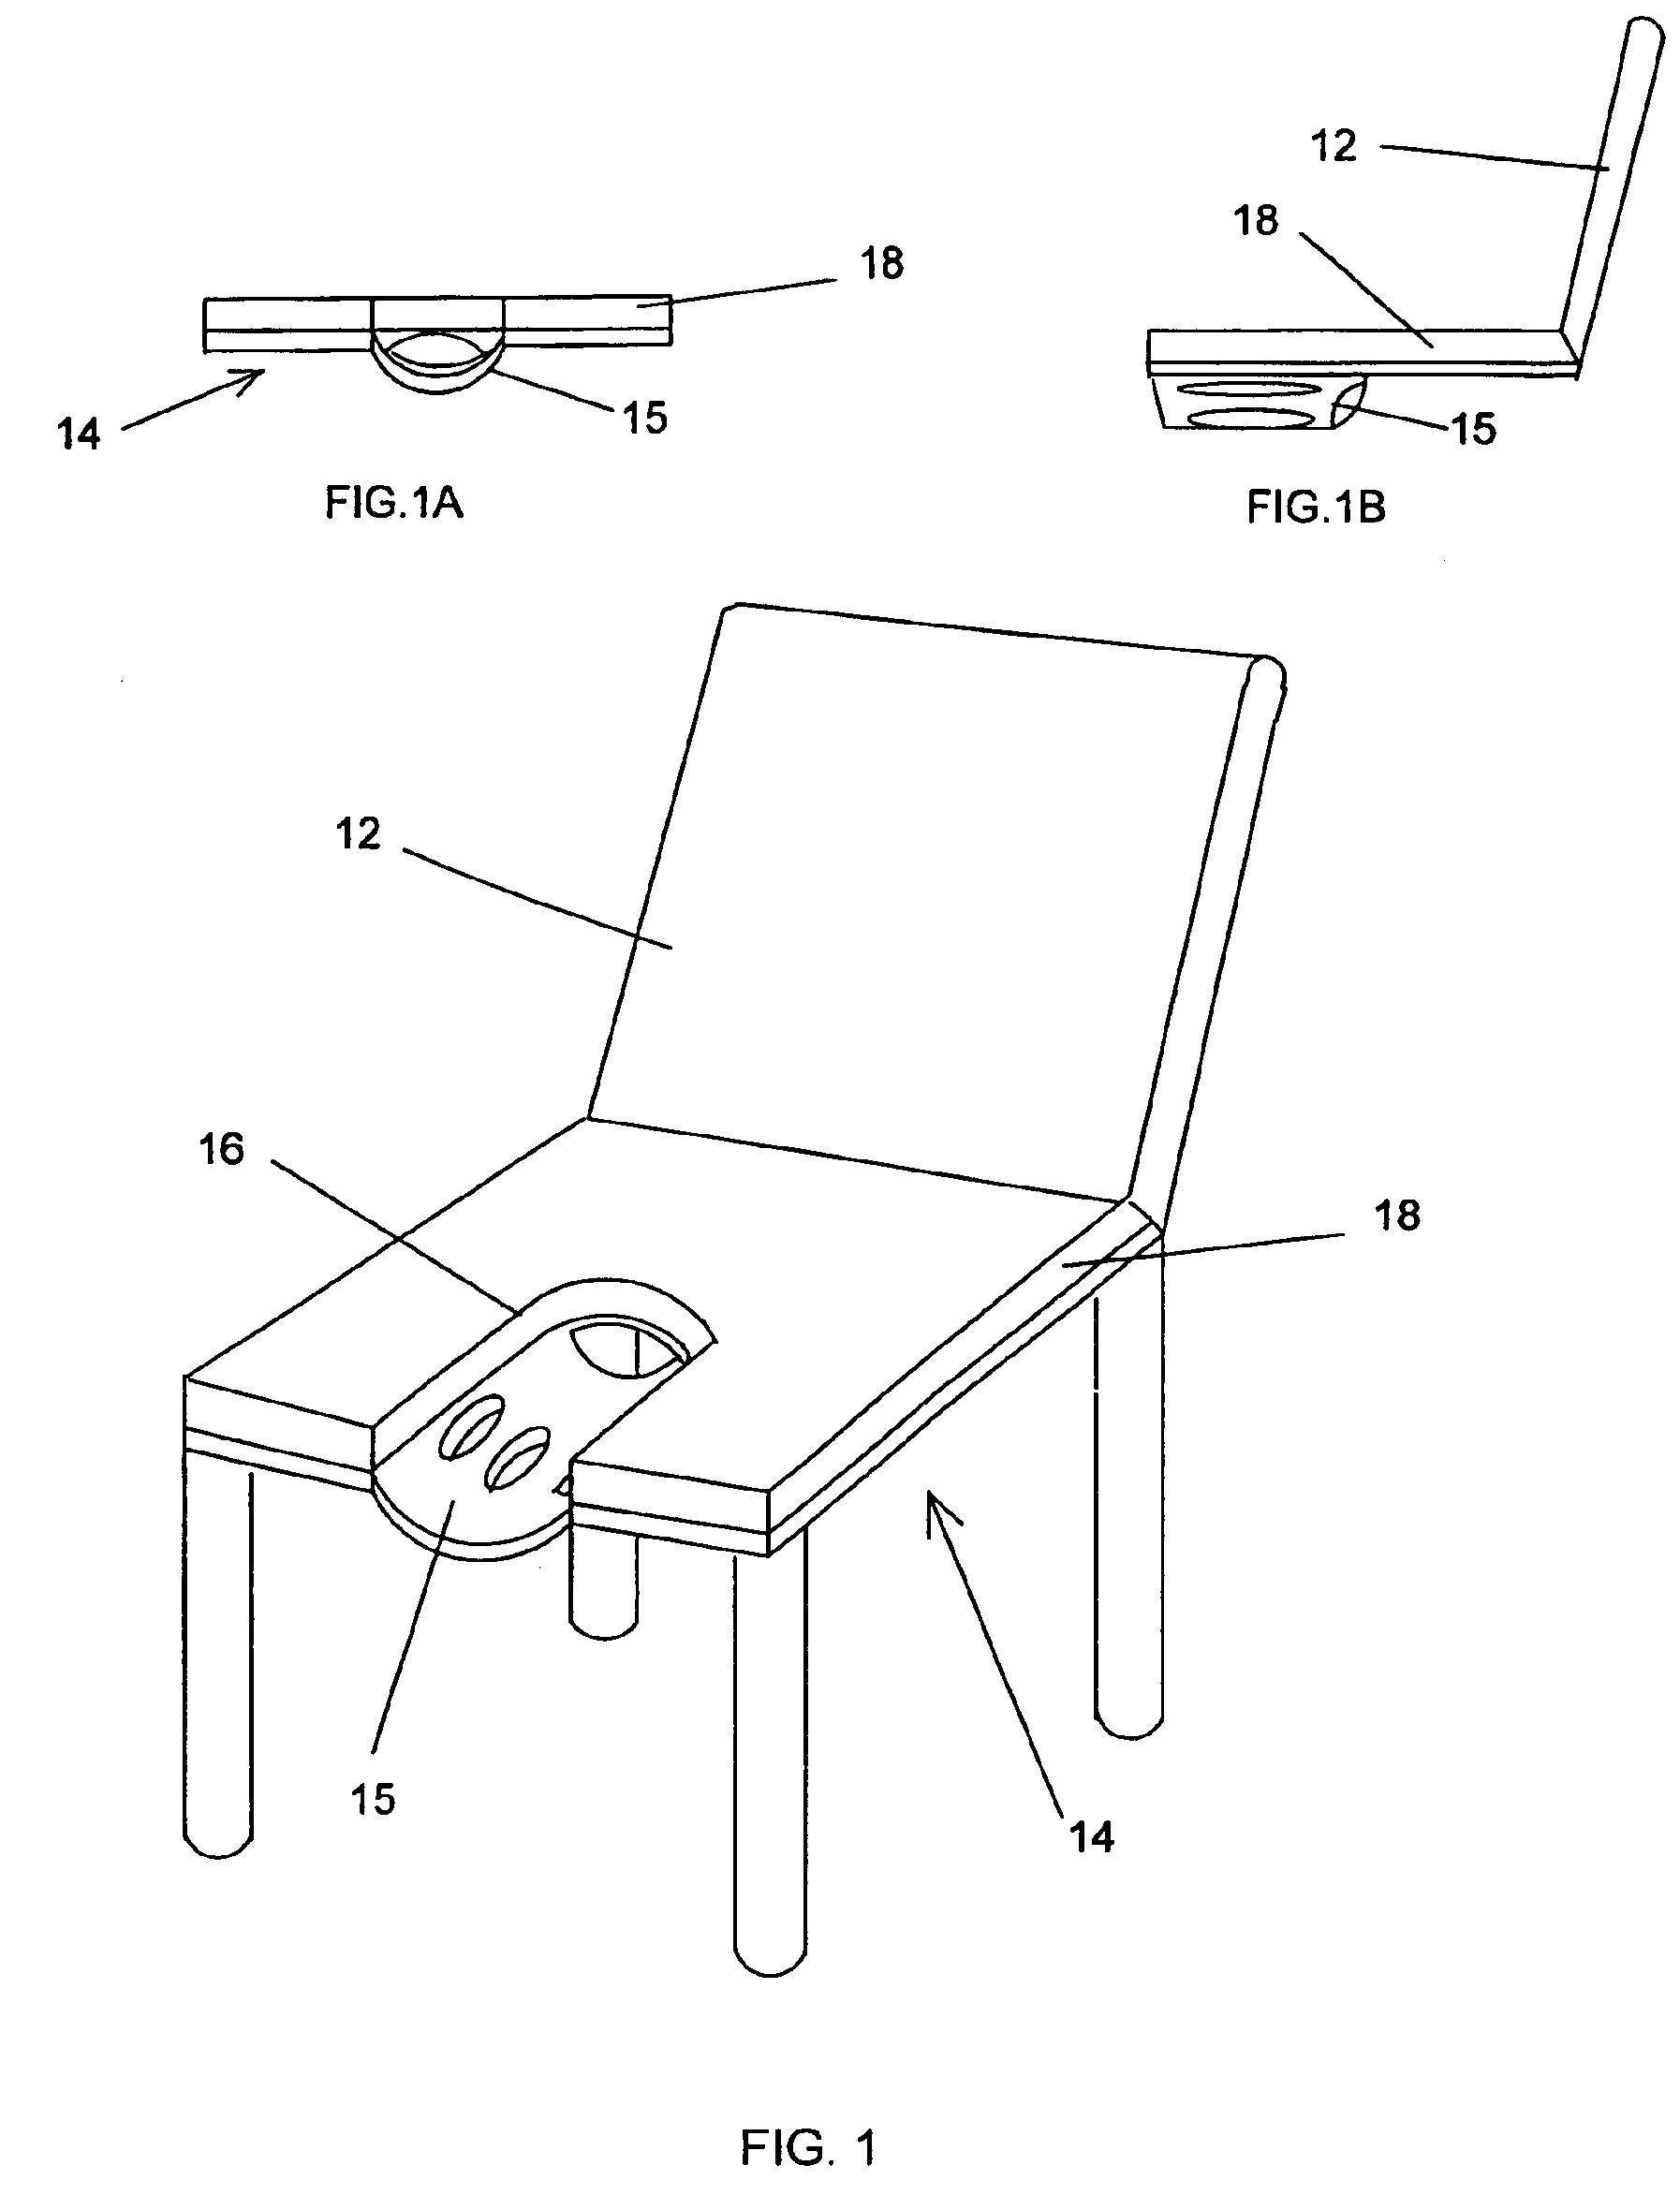 Seat with contoured-front for localized body heat dispersion and pressure reduction